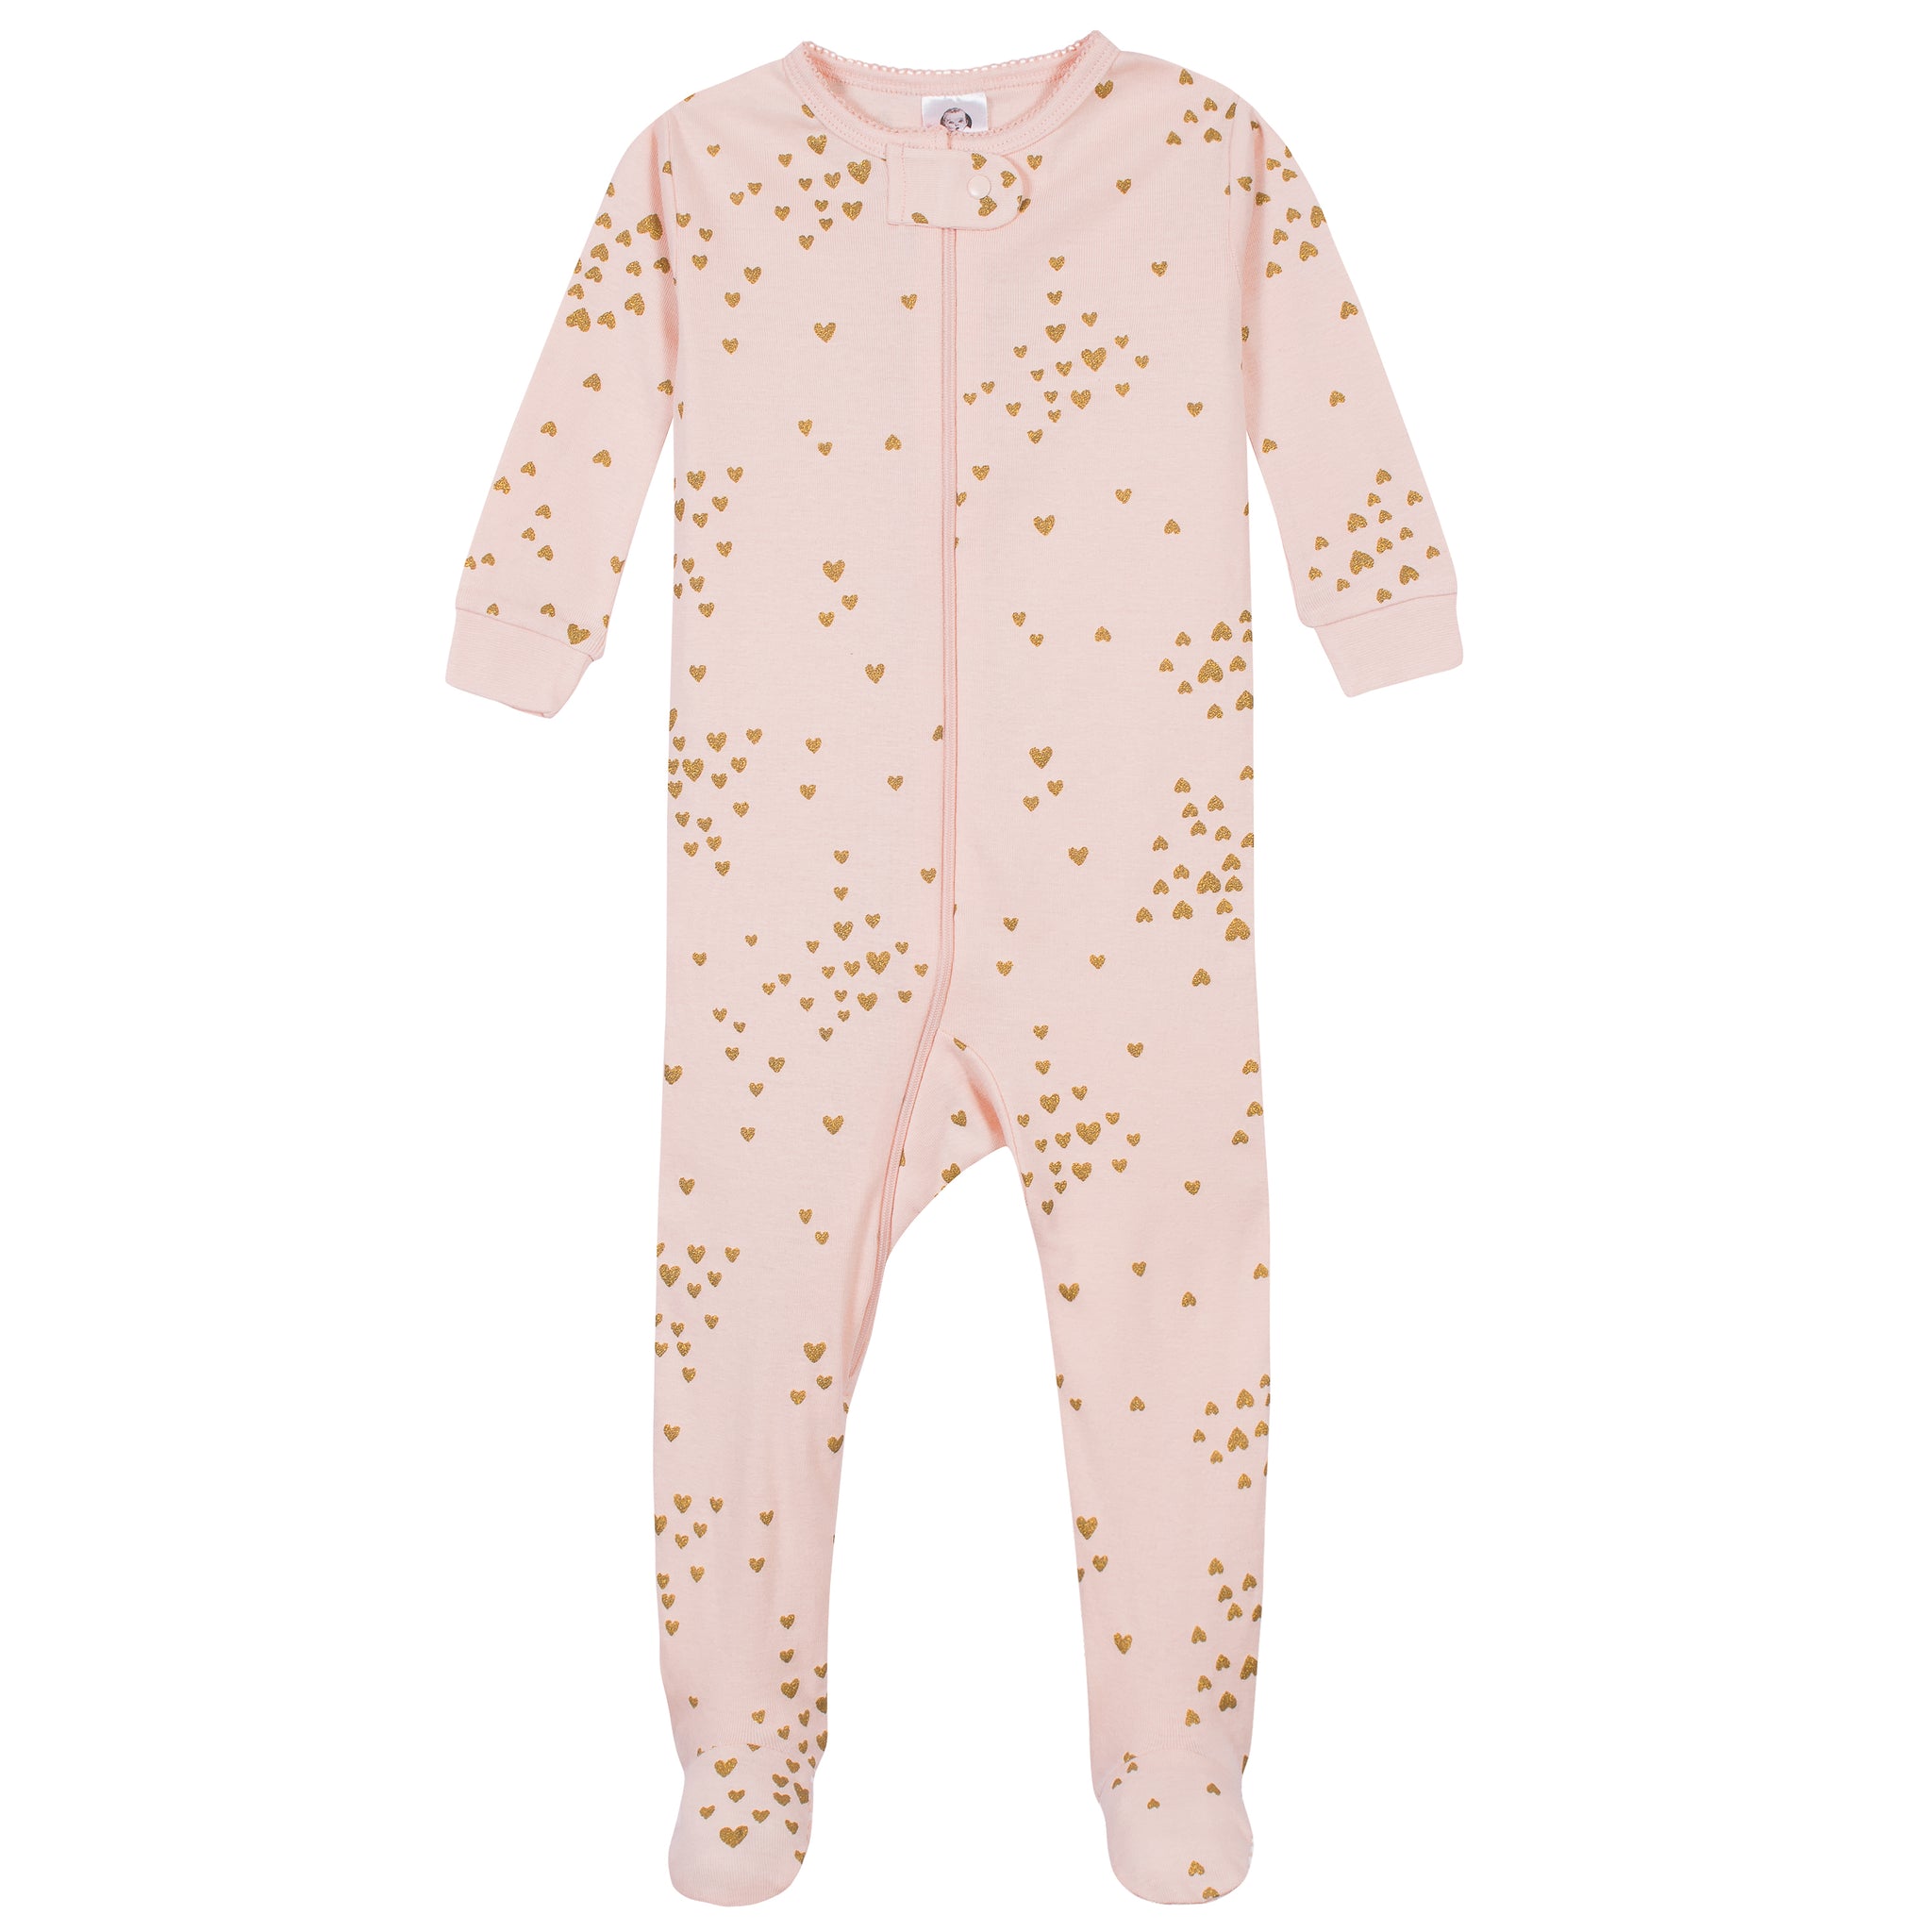 2-Pack Girls Love Snug Fit Footed Cotton Pajamas-Gerber Childrenswear Wholesale